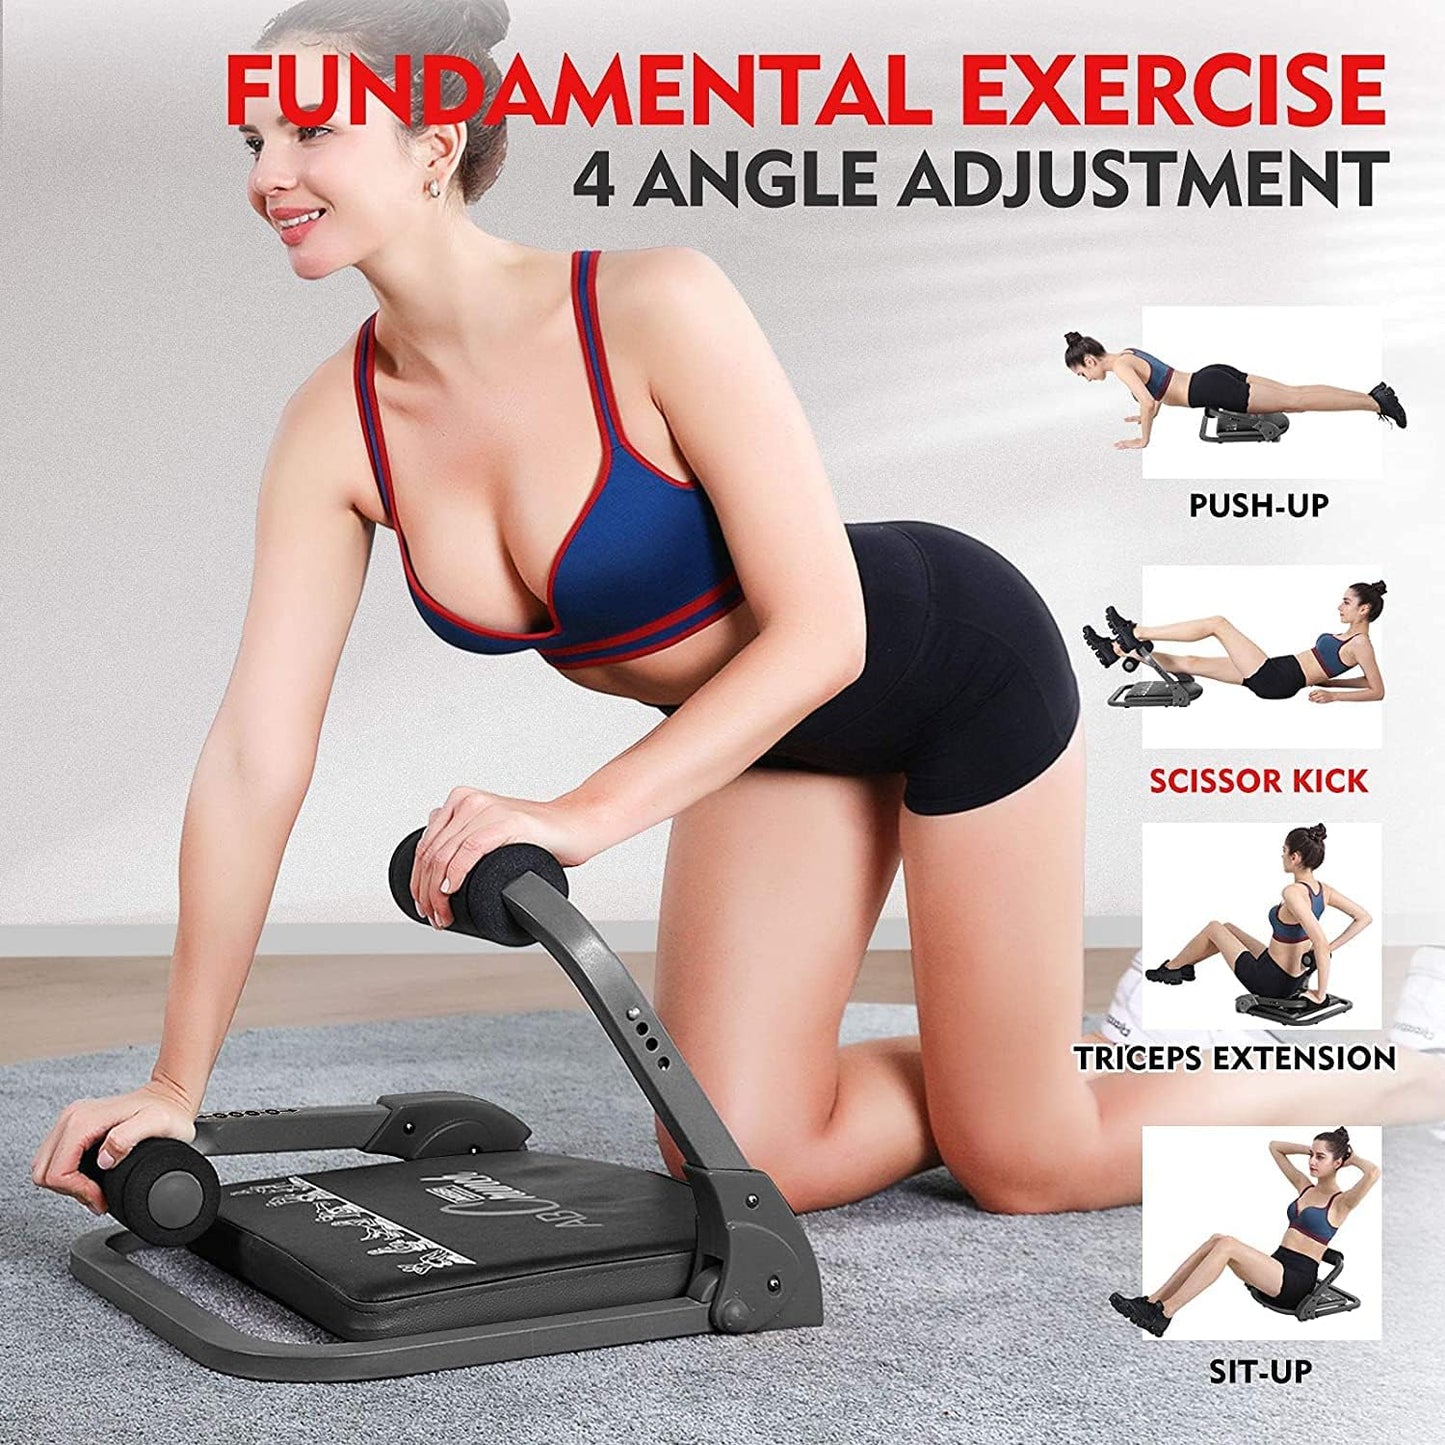 Ab Crunch Machine,Exercise Equipment for Home Gym Equipment for Strength Training with Resistance Bands, Abs and Total Body Workout,Sole Brand and Patent Owner